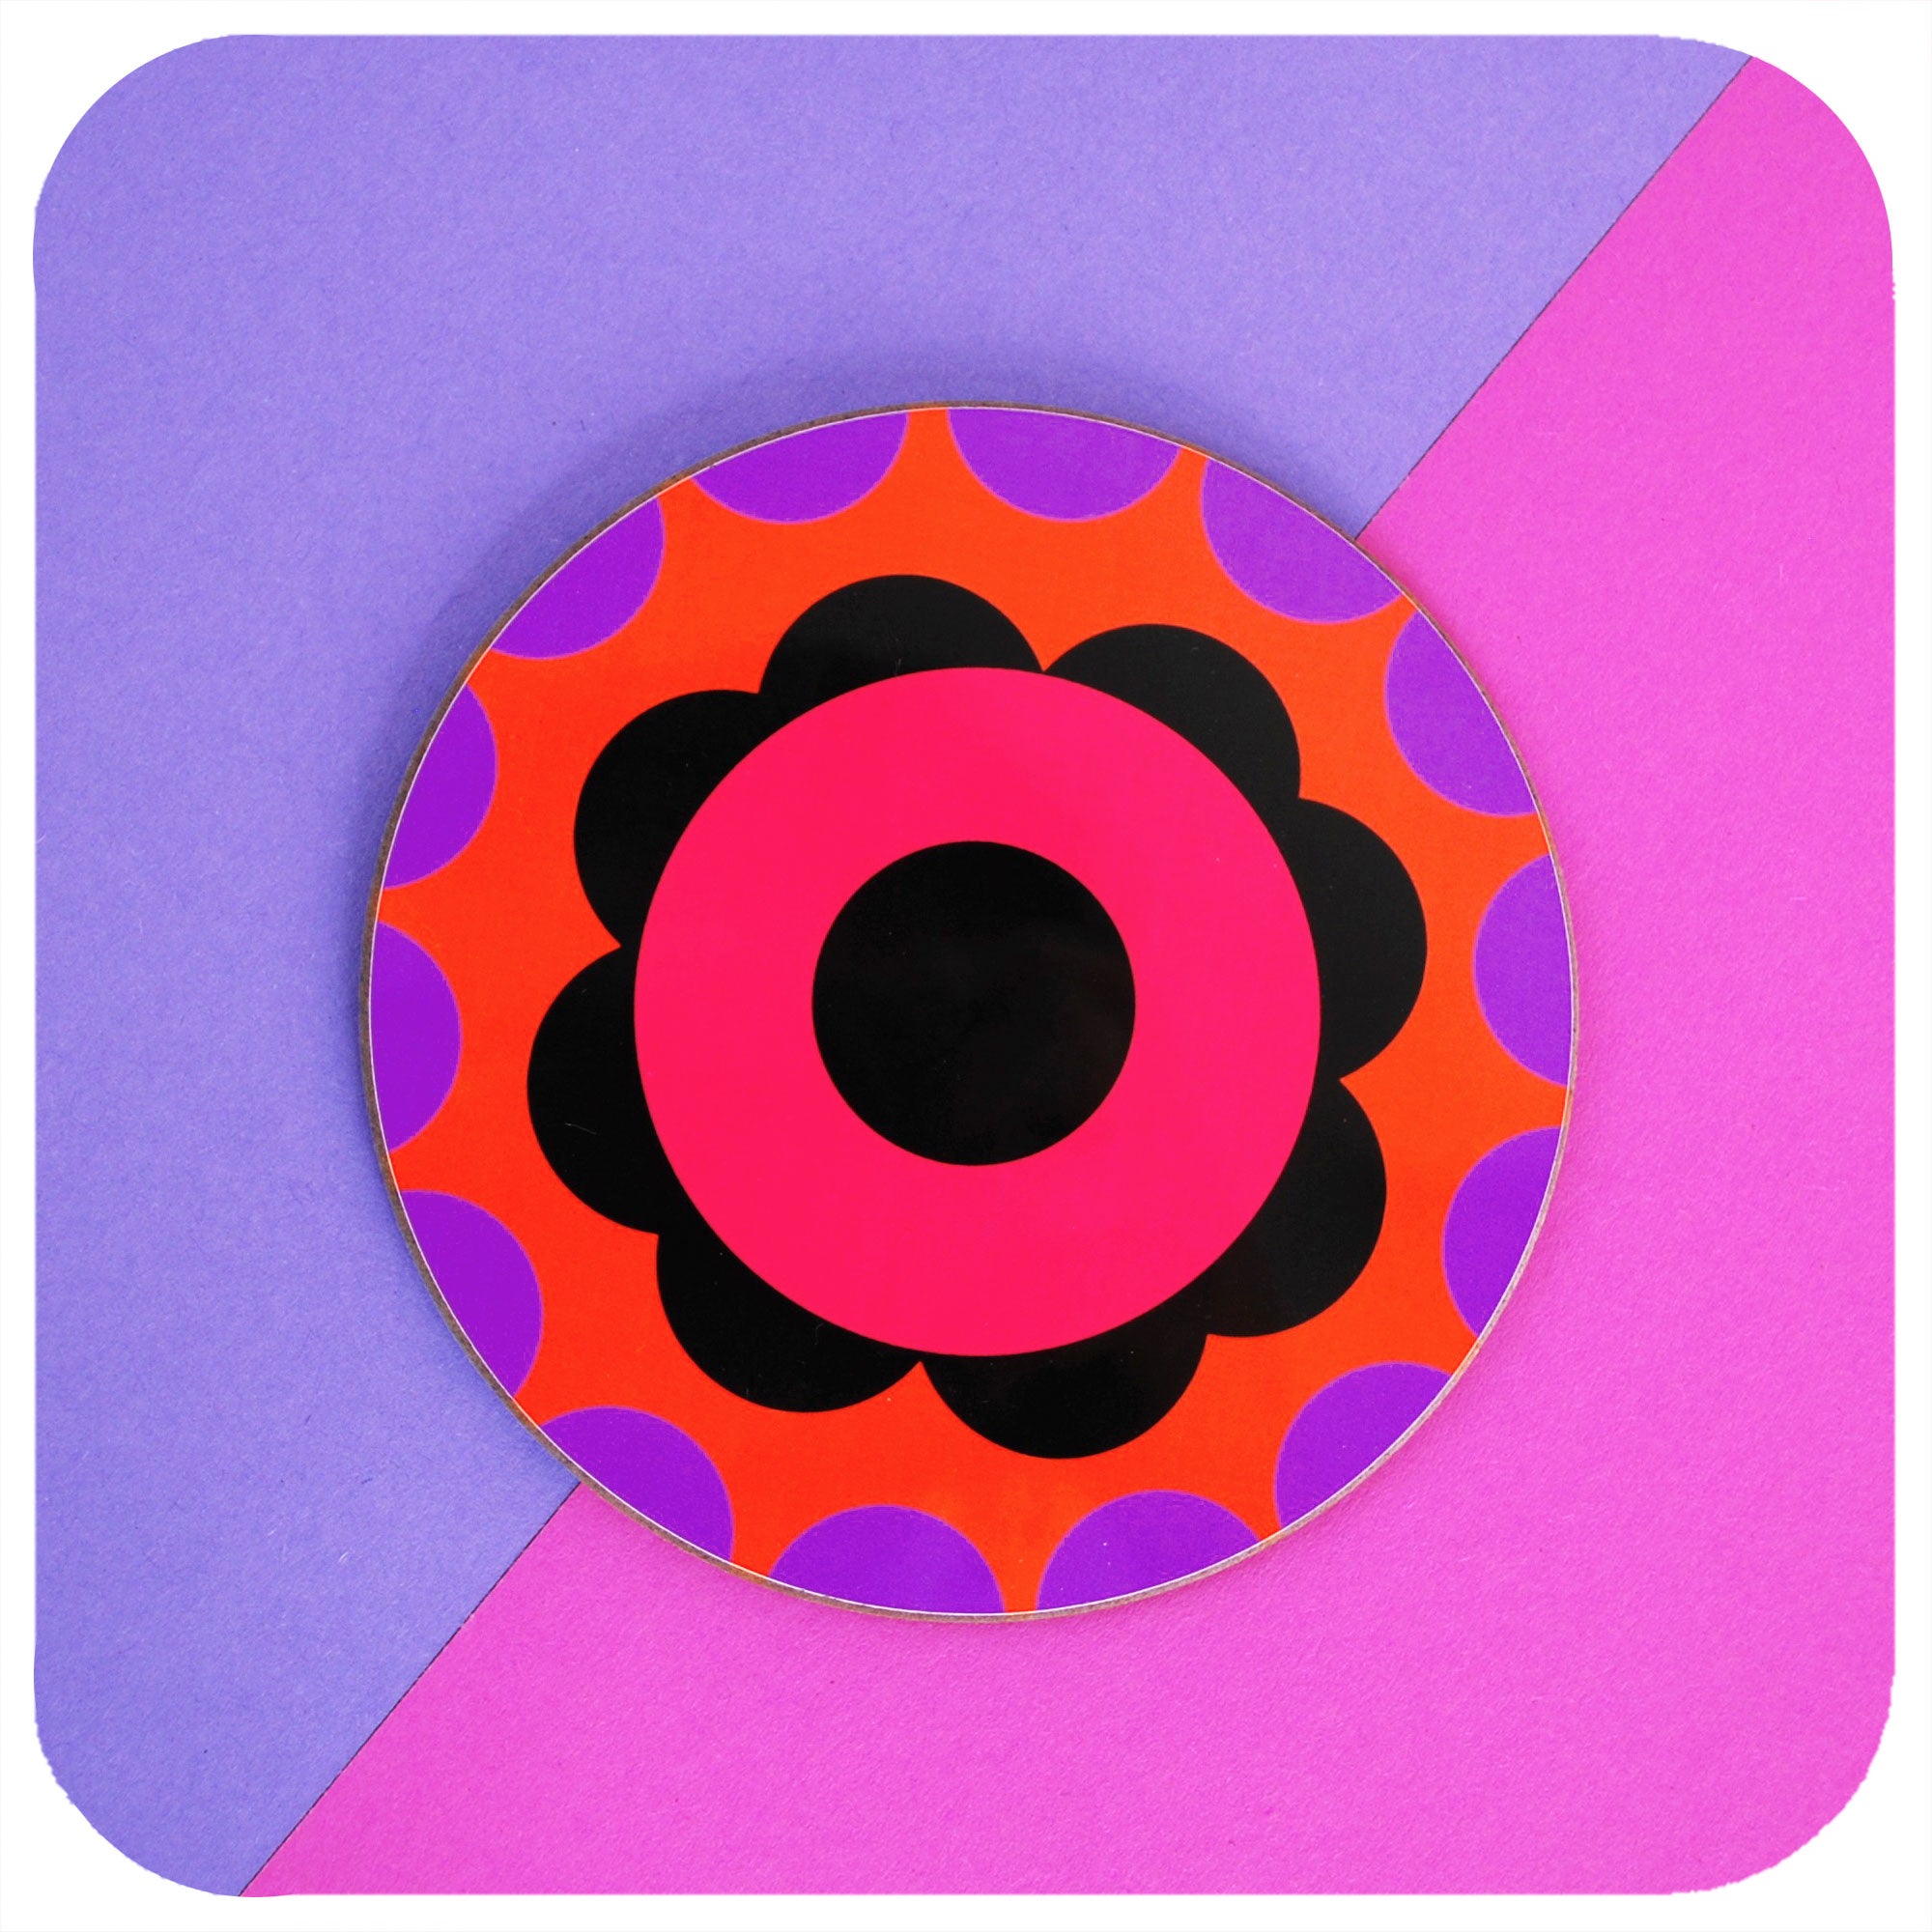 One 60s Flower Power round coaster on colourful pink and purple background | The Inkabilly Emporium